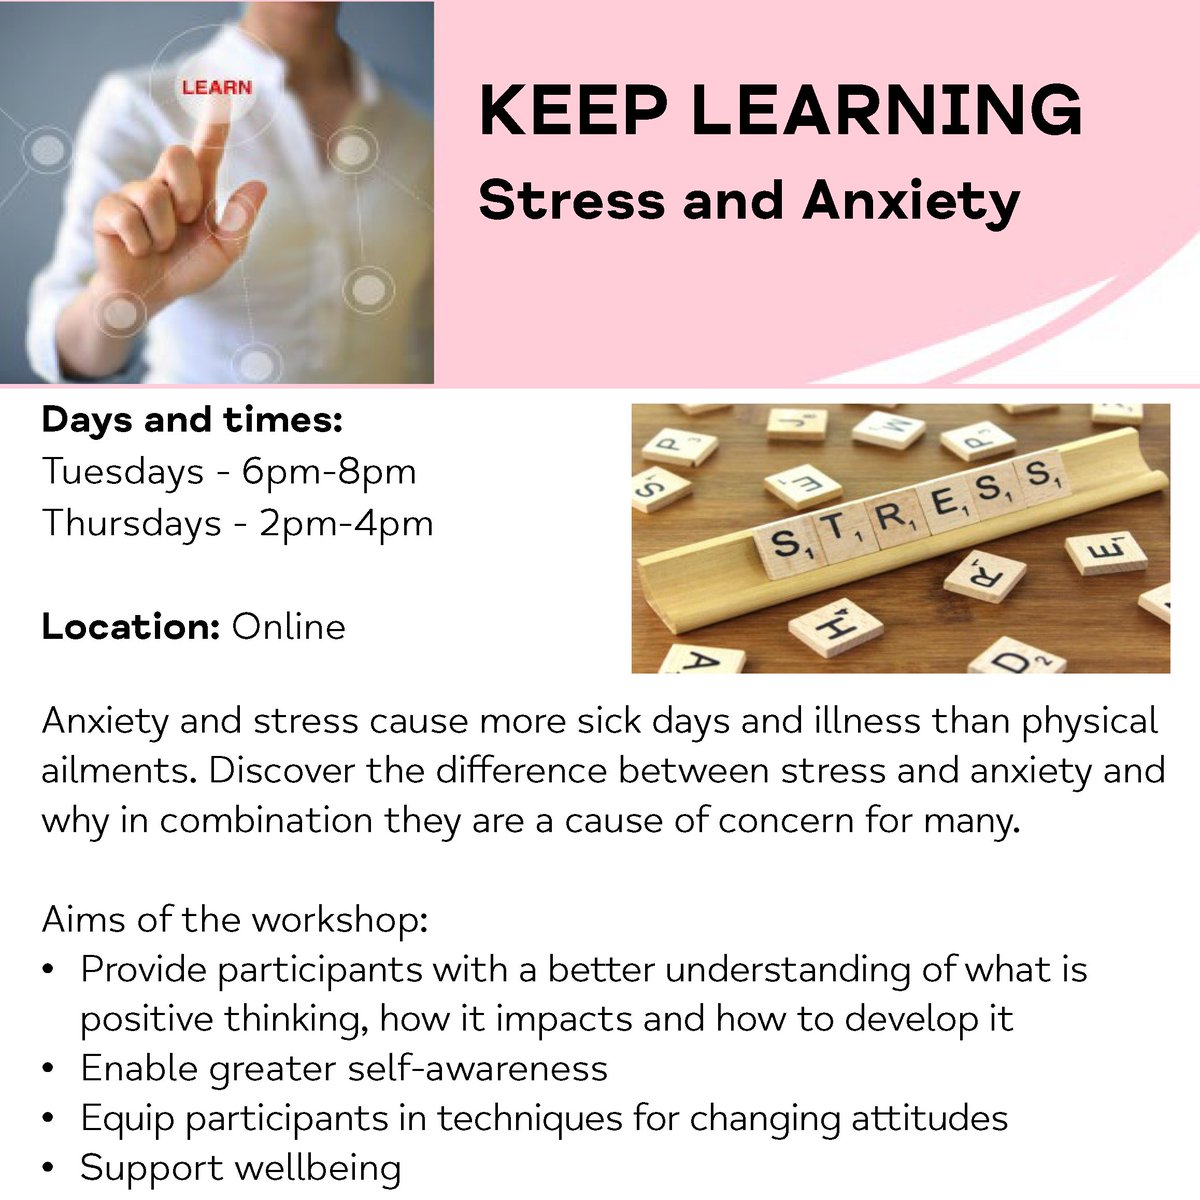 April is Stress Awareness Month. At East Kent Mind we offer an online Stress and Anxiety workshop. These take place on Tuesdays at 6pm & Thursdays at 2pm - for two hours.
To sign-up for the workshop, please click: bit.ly/3VGs5jl
#eastkent #stress #anxiety #LittleByLittle